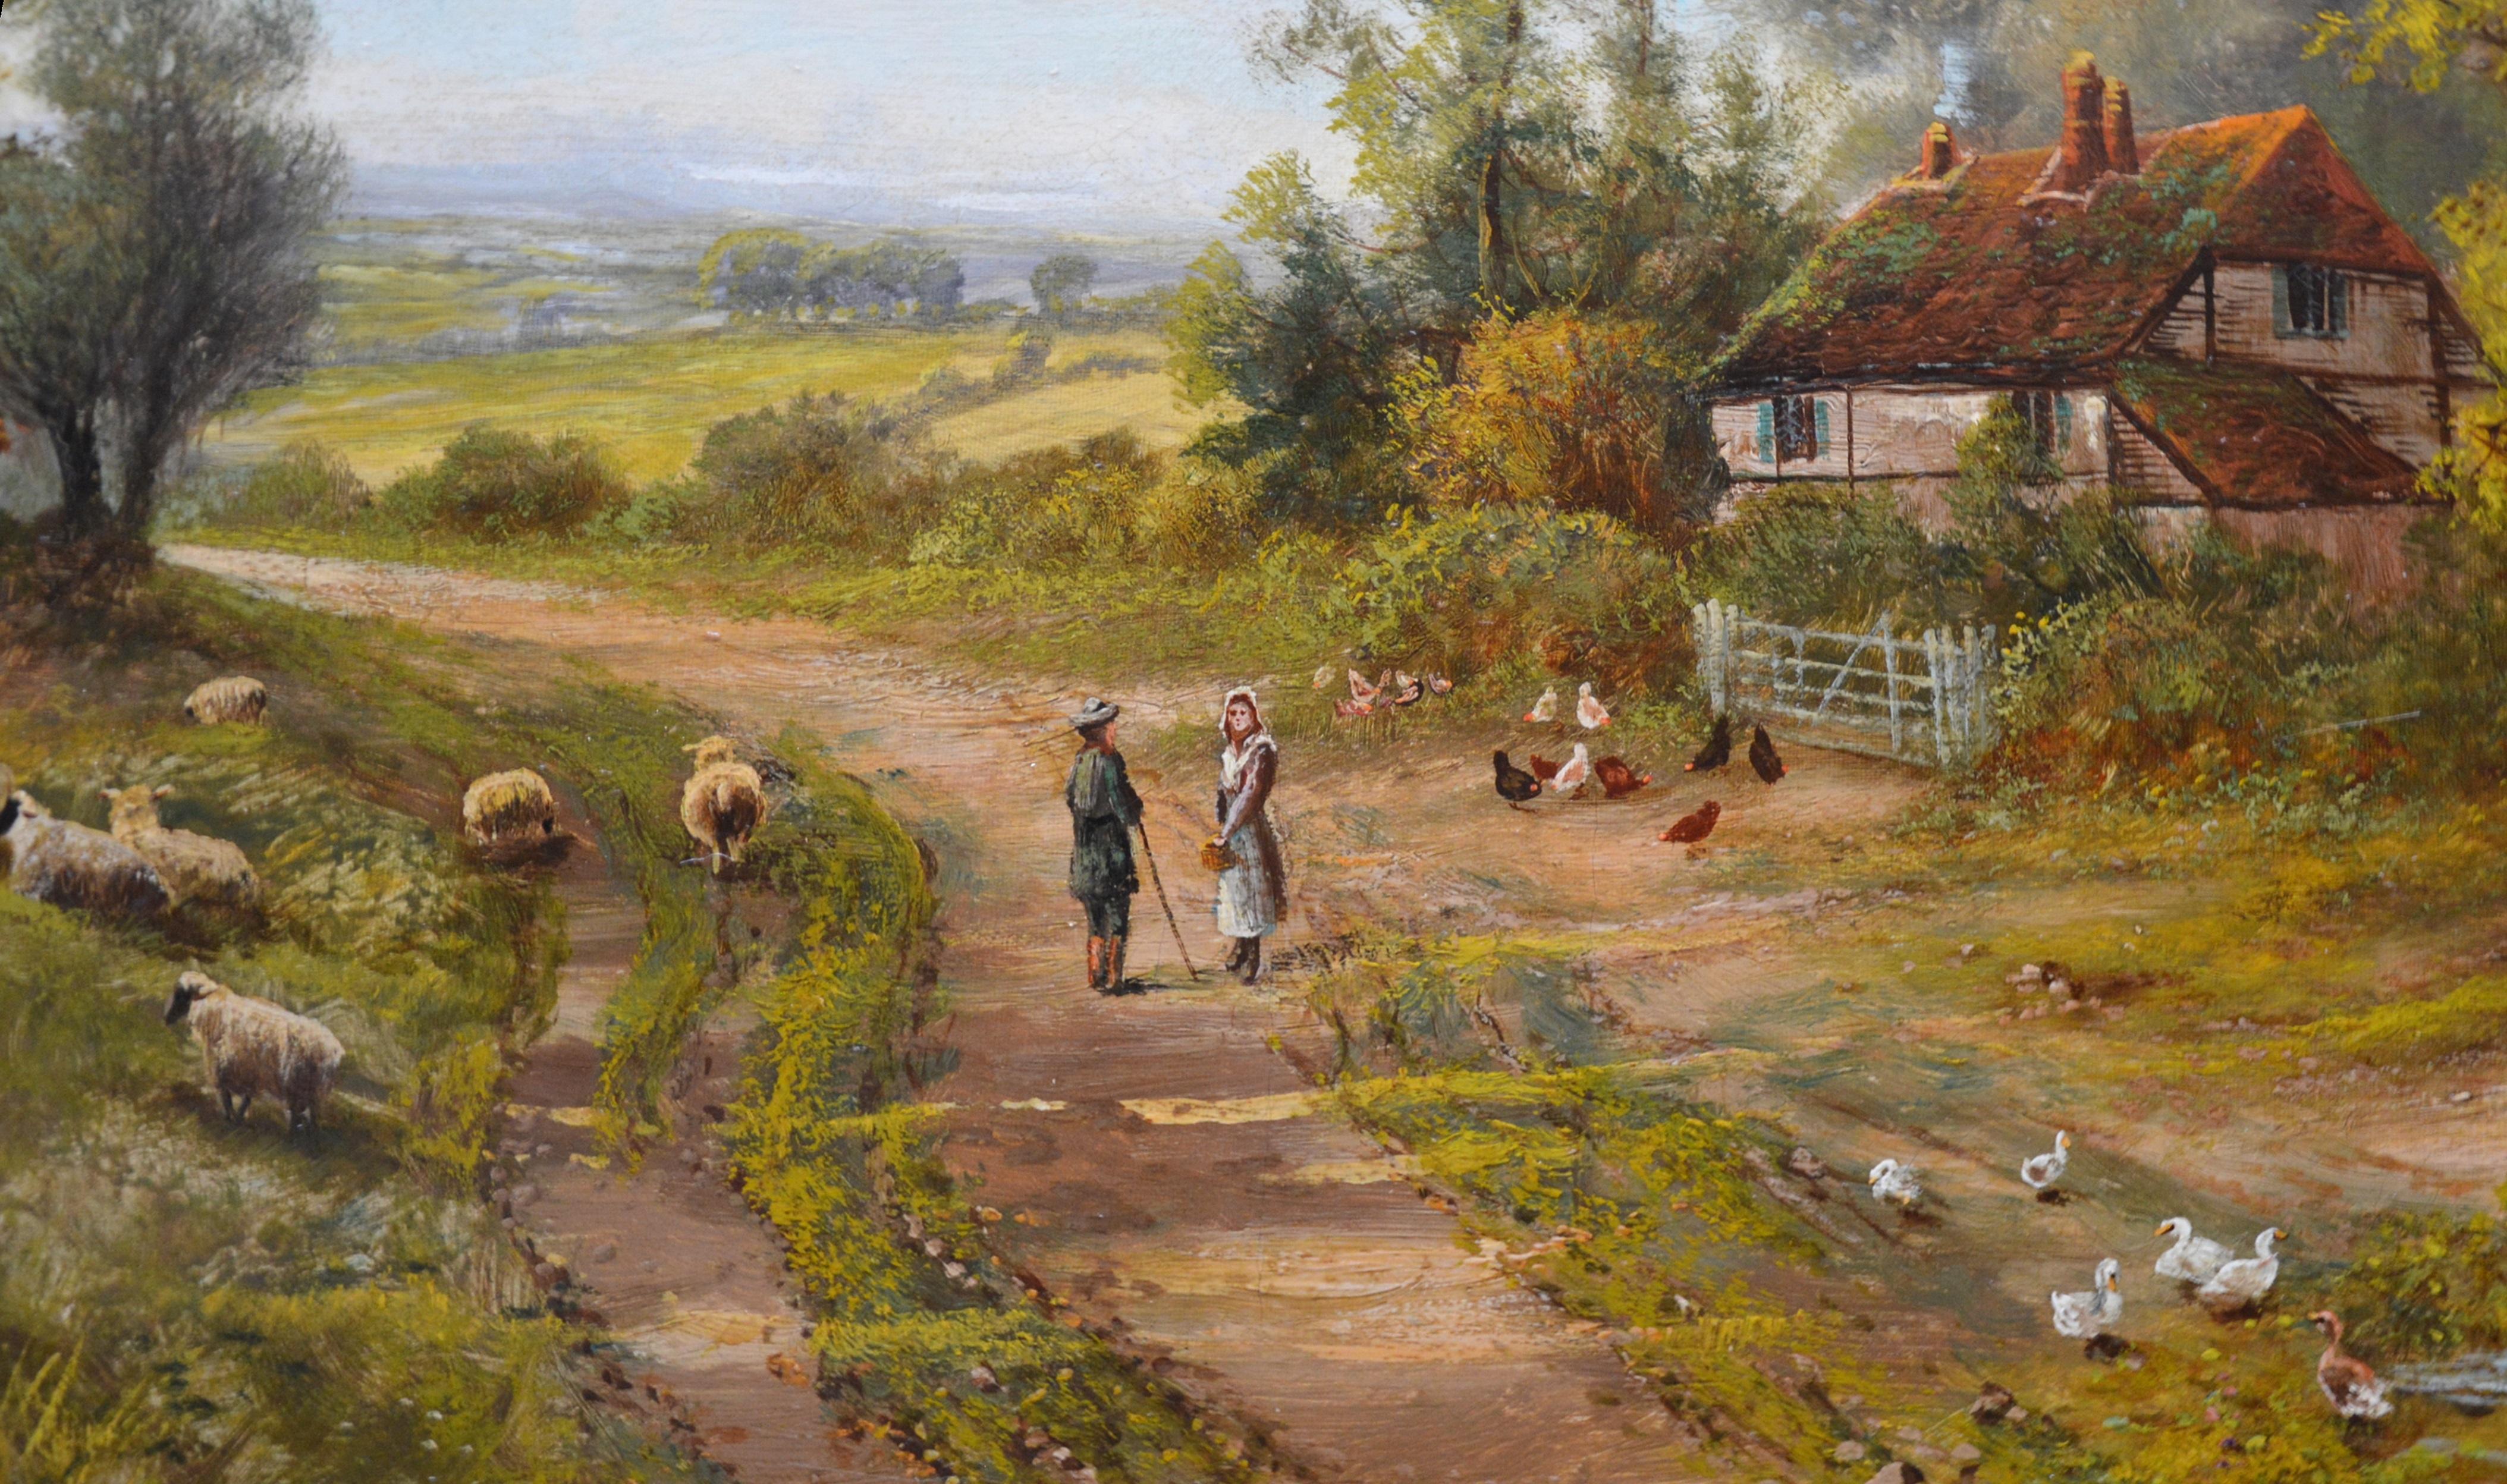 ‘The Edge of Epping Forest’ by Octavius Thomas Clark (1850-1921).

A large fine 19th century oil on canvas depicting sheep, geese and hens, and two figures in conversation by an old cottage at the edge of Epping Forest by the popular Victorian